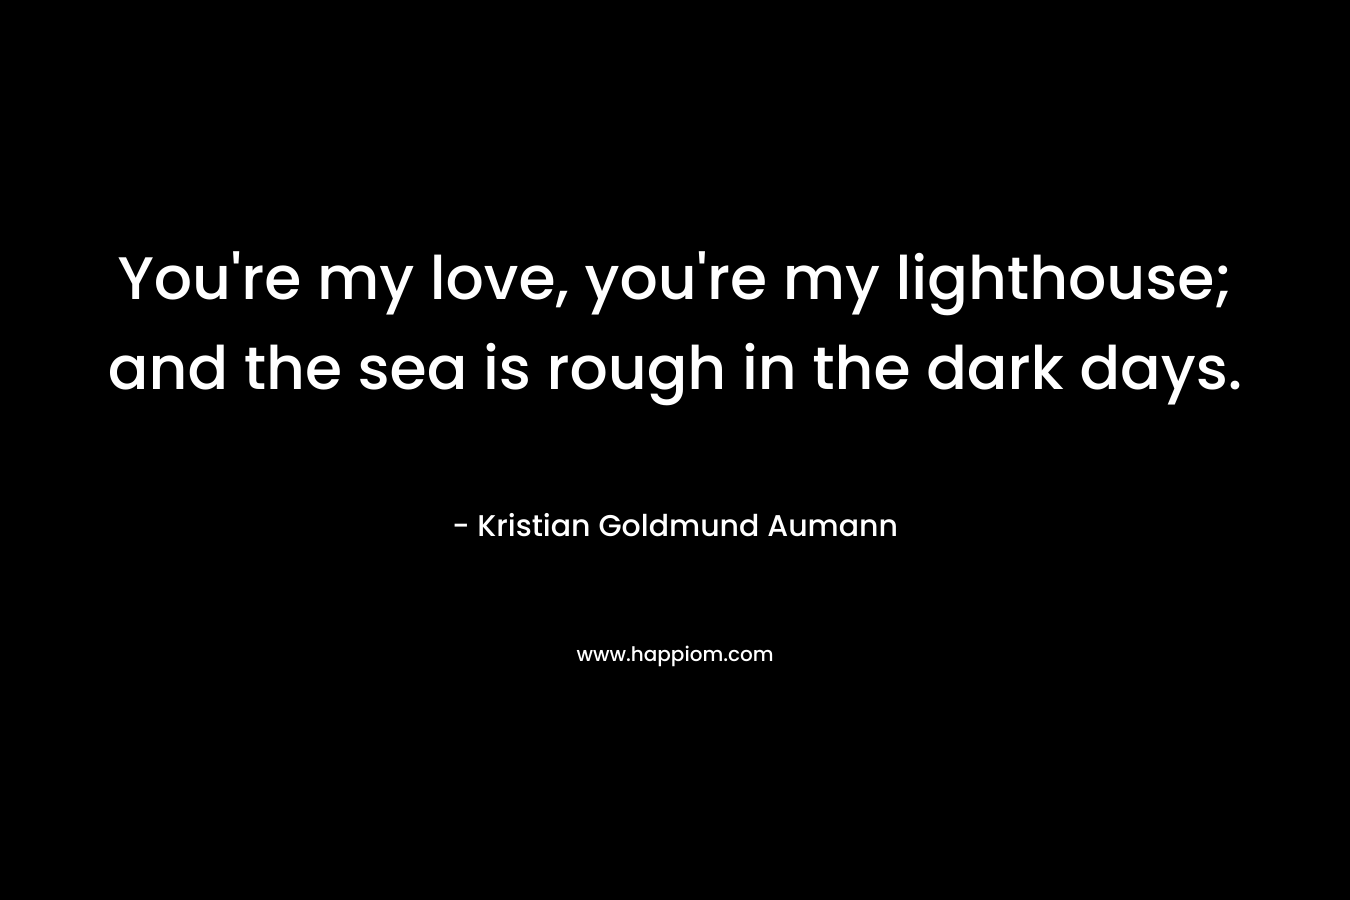 You’re my love, you’re my lighthouse; and the sea is rough in the dark days. – Kristian Goldmund Aumann